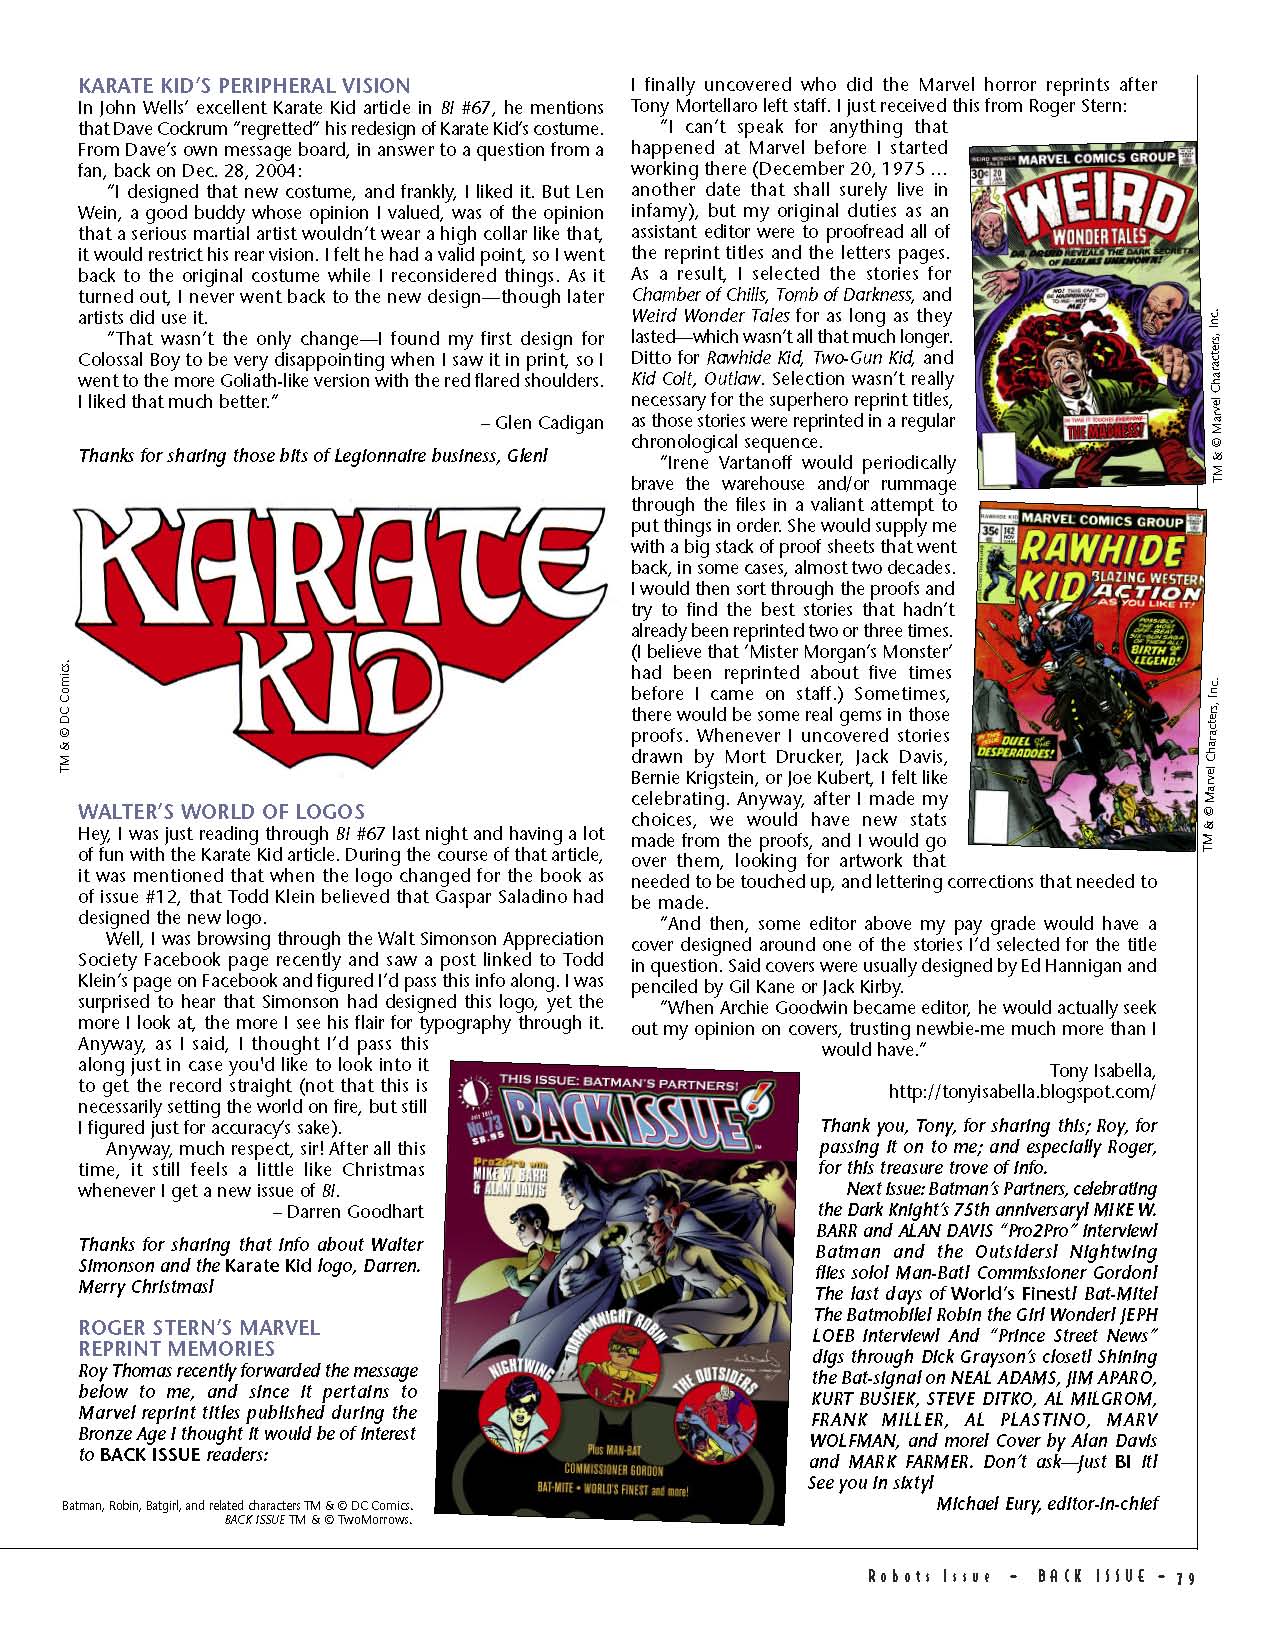 Read online Back Issue comic -  Issue #72 - 81